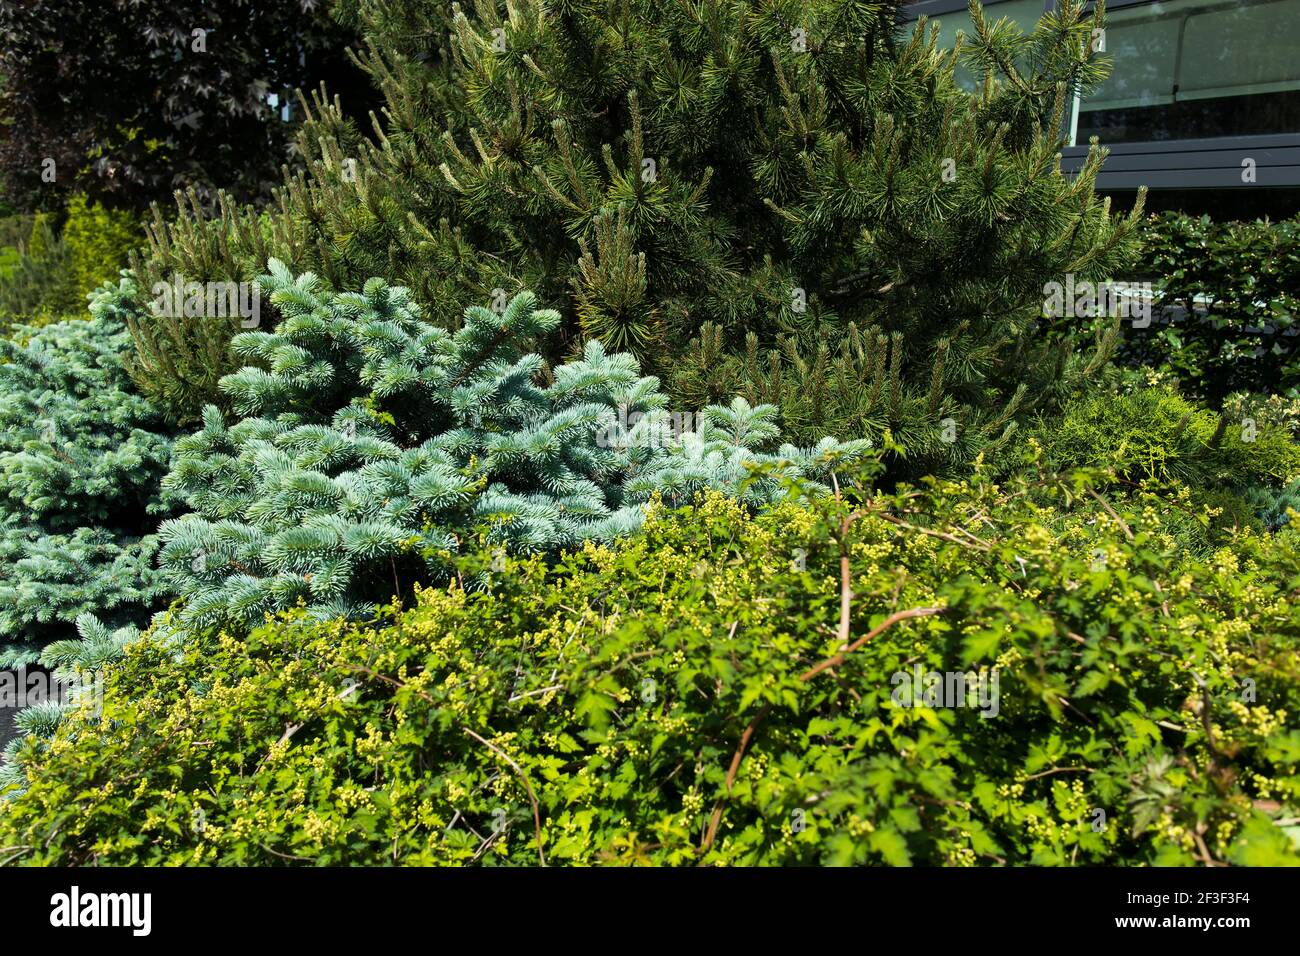 Various types of conifers decorate the garden. Landscape design Stock Photo